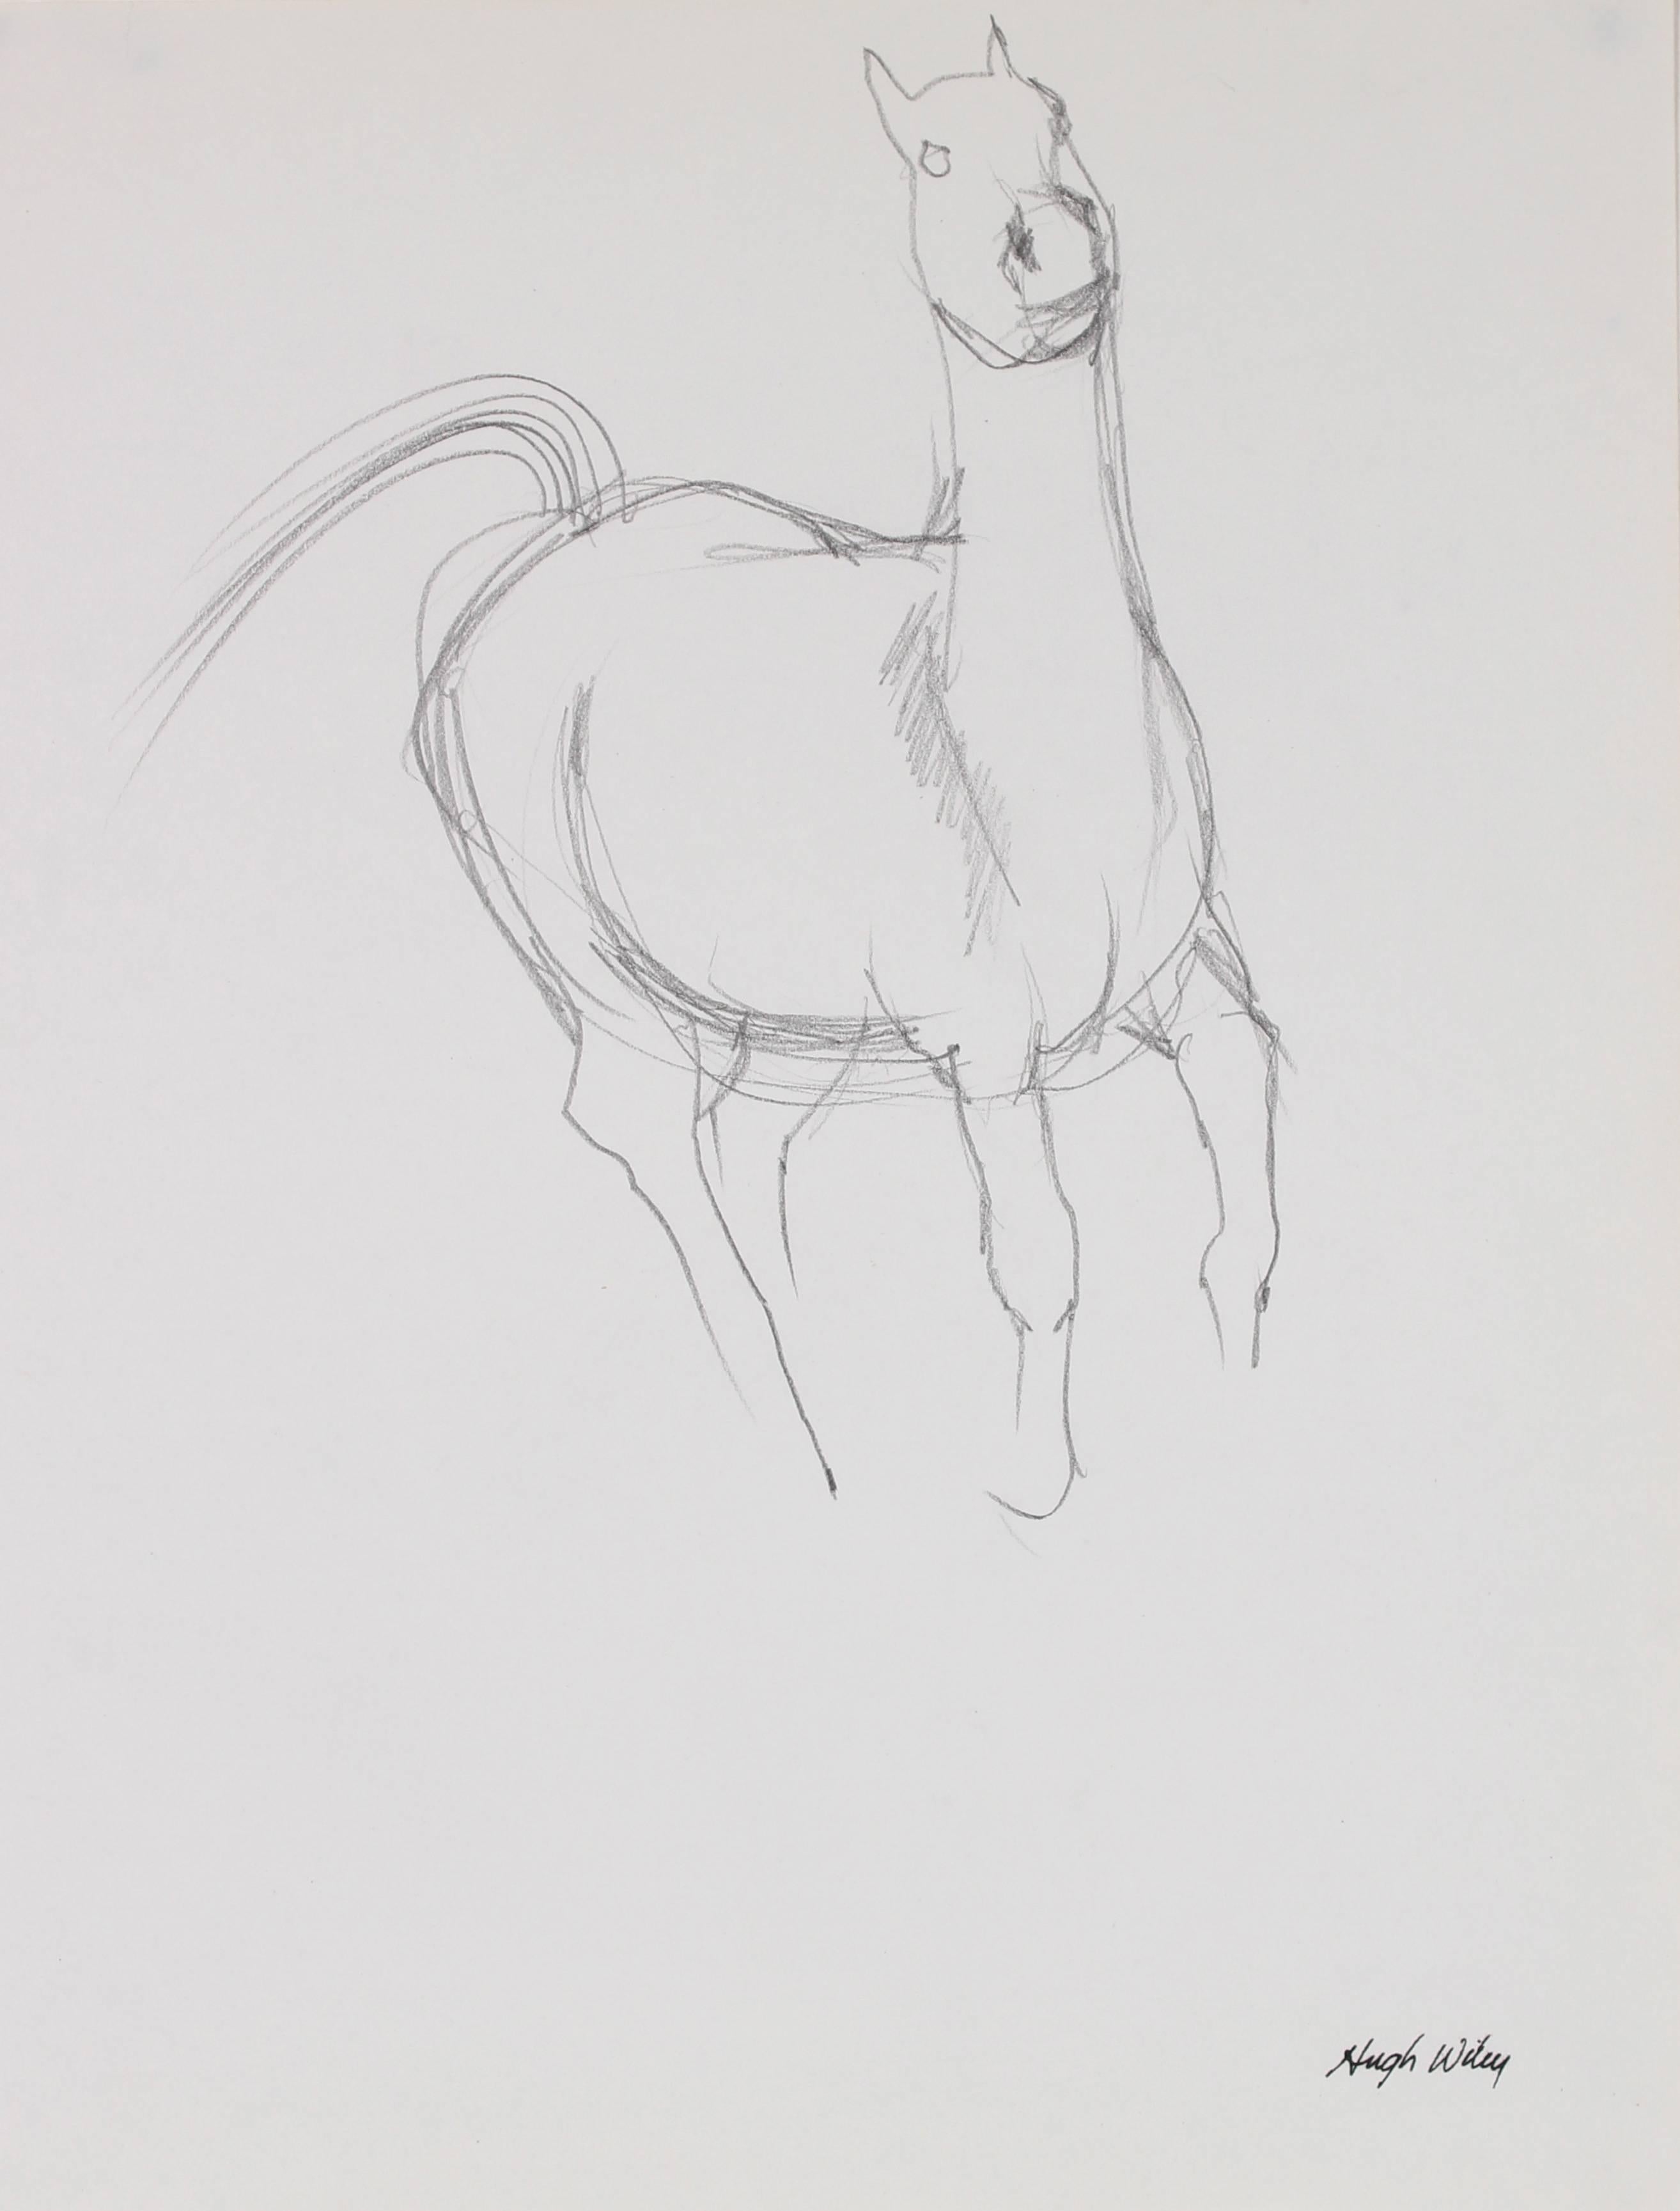 Hugh Wiley Animal Art - Study of a Horse in Graphite, 1974